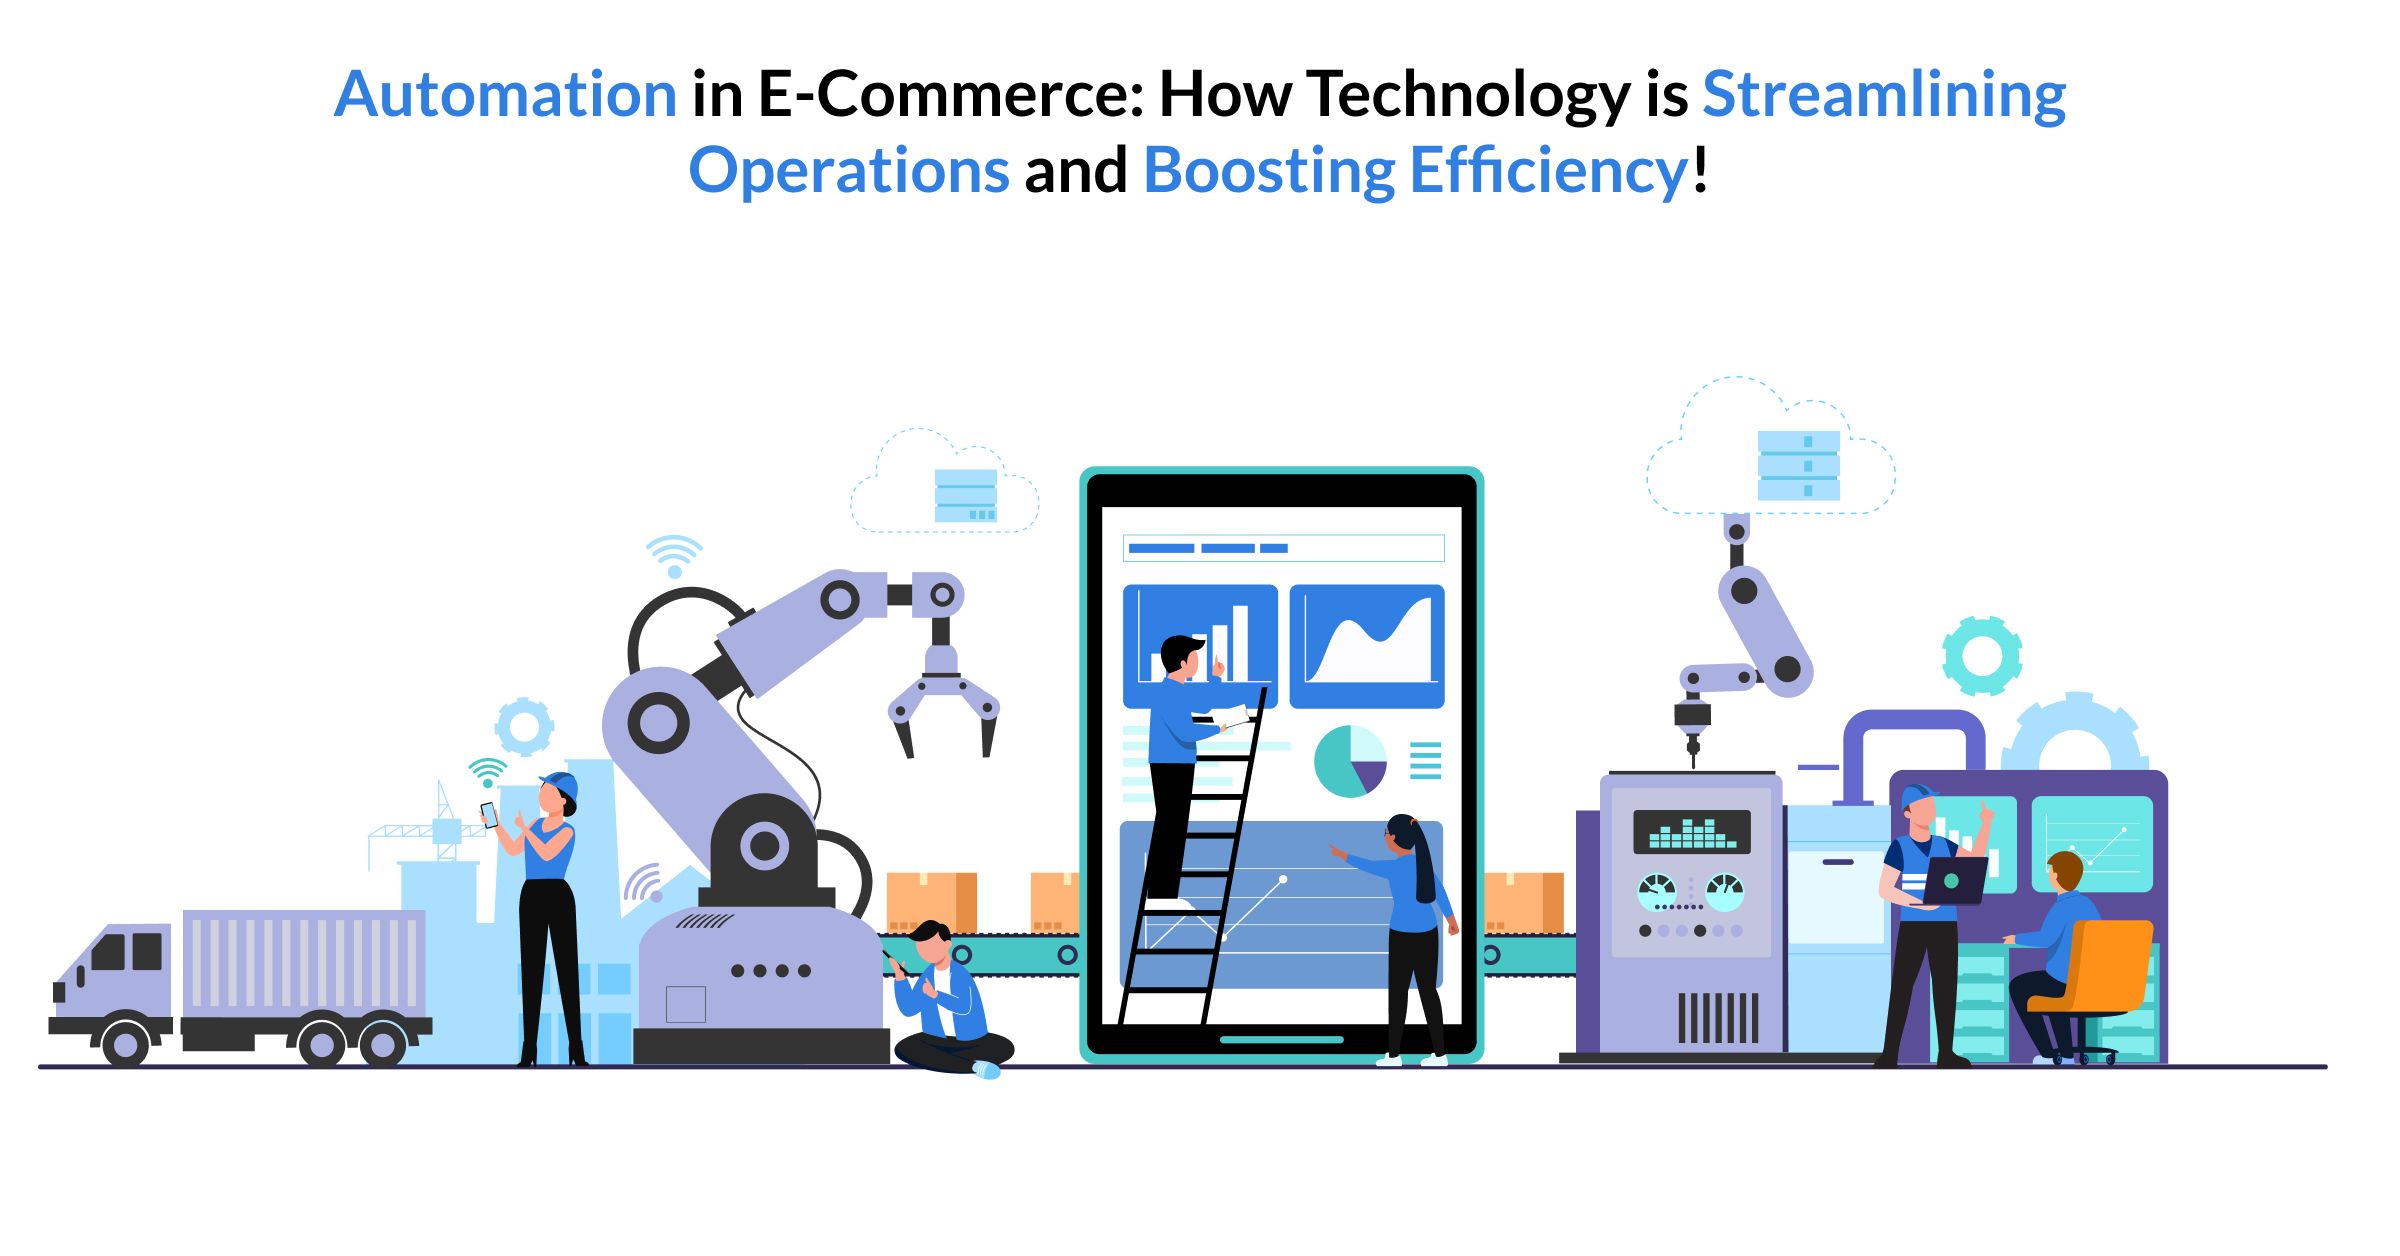 Automation in E-Commerce: How Technology is Streamlining Operations and Boosting Efficiency!